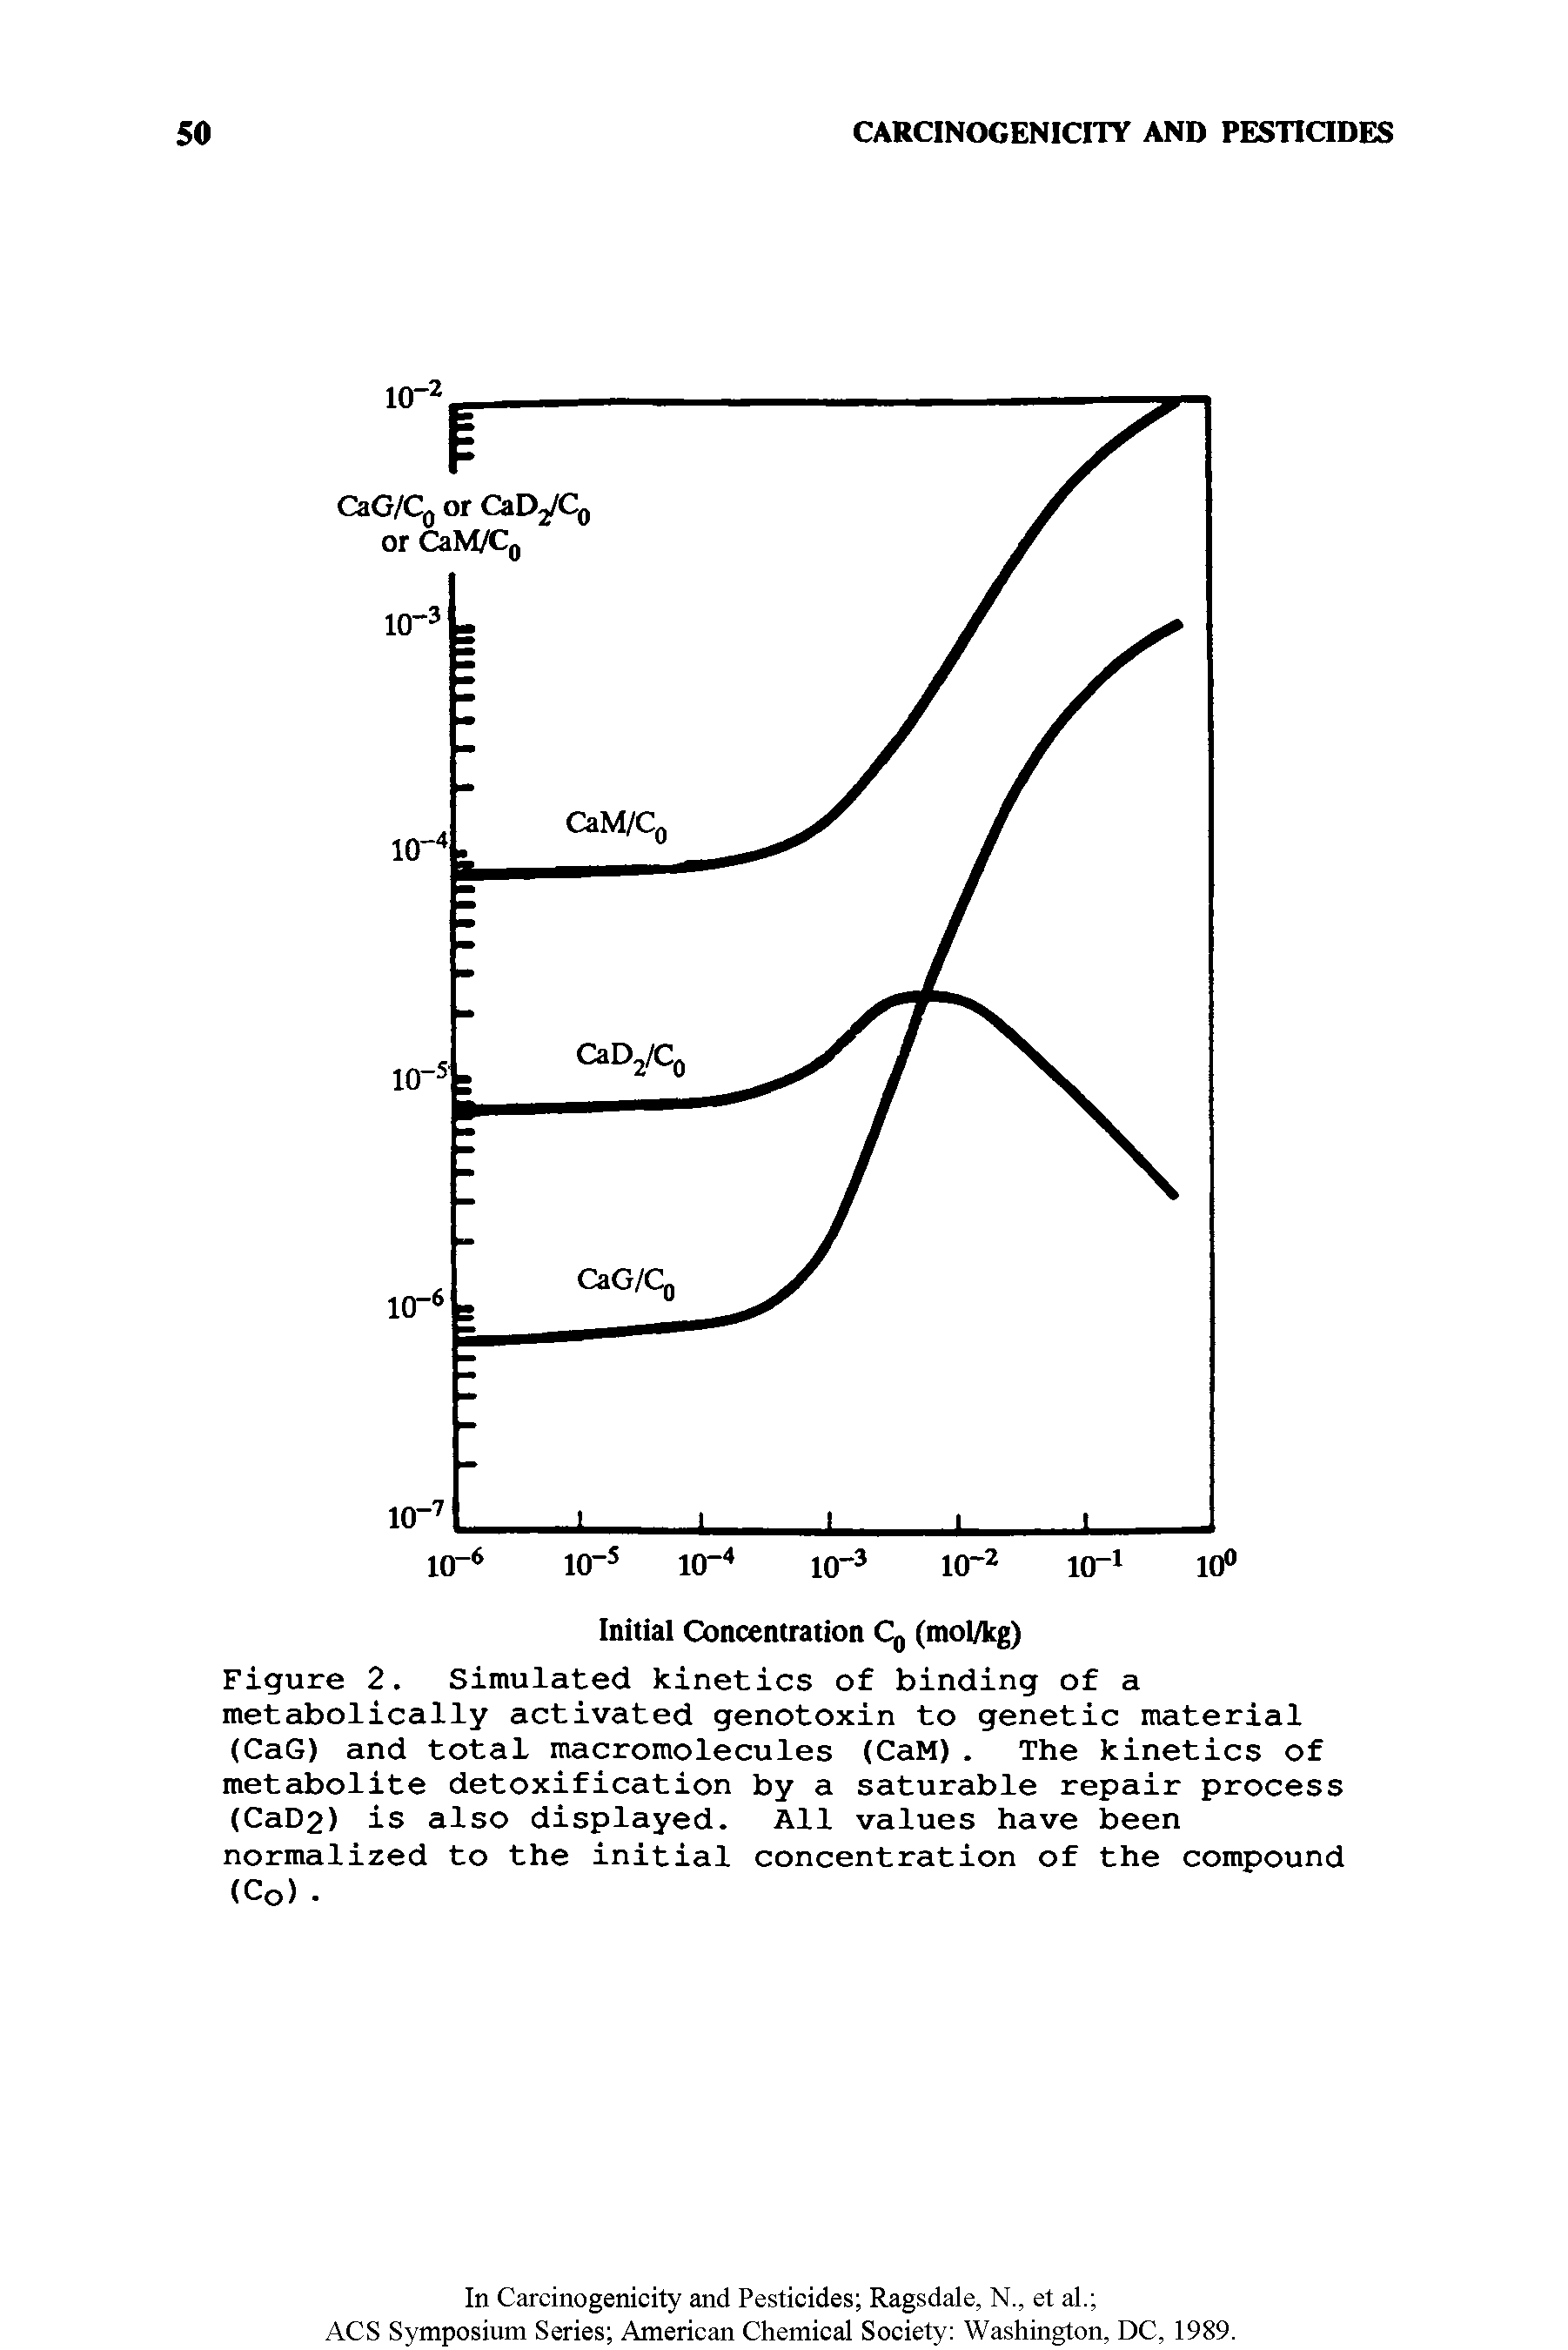 Figure 2. Simulated kinetics of binding of a metabolically activated genotoxin to genetic material (CaG) and total macromolecules (CaM). The kinetics of metabolite detoxification by a saturable repair process (CaD2) is also displayed. All values have been normalized to the initial concentration of the compound (Co). ...